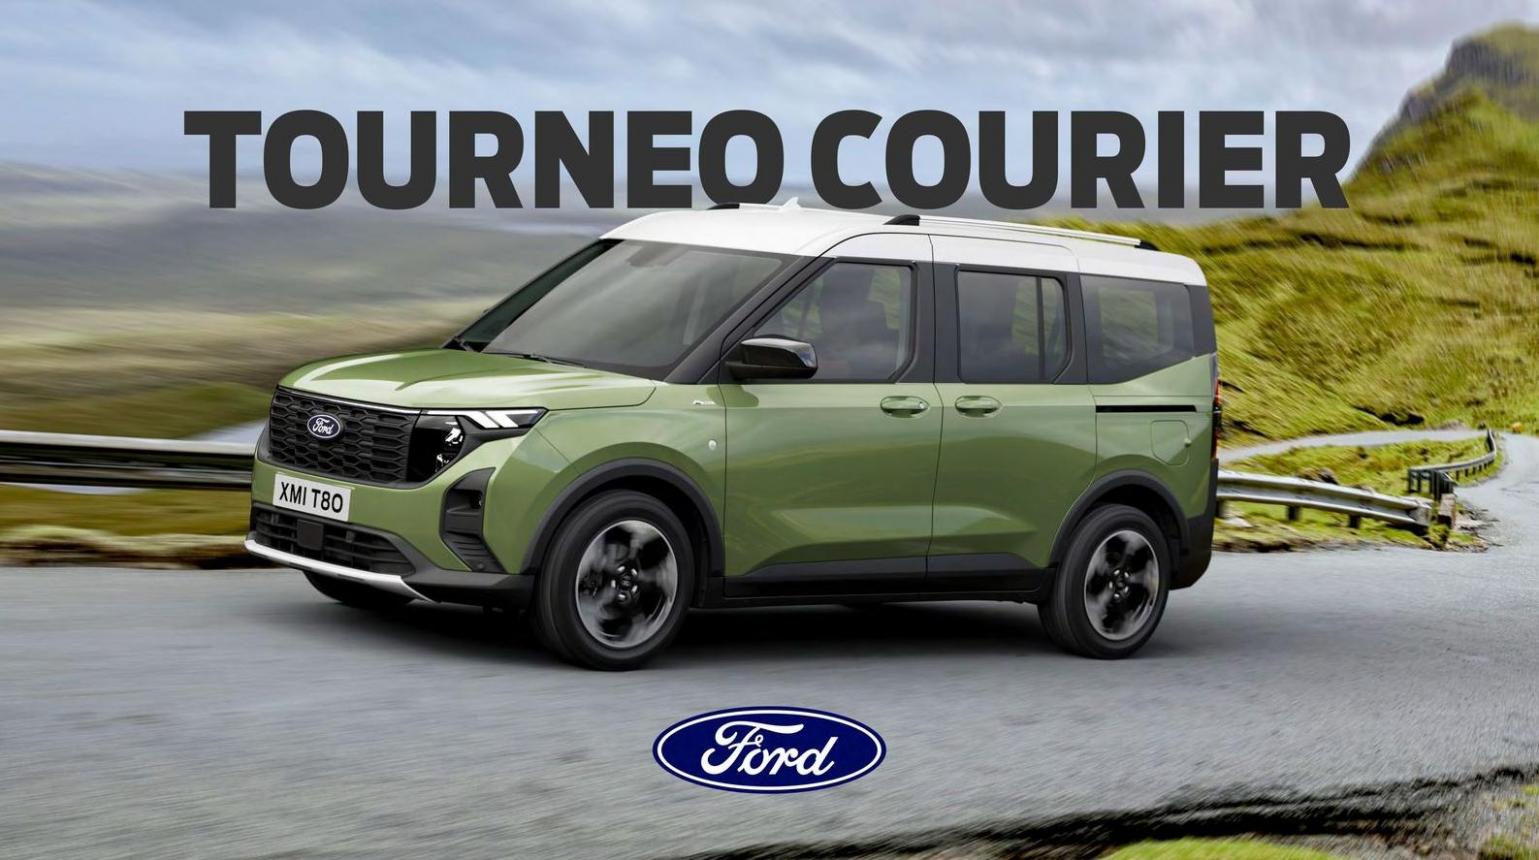 Tourneo Courier. Ford (2025-03-05-2025-03-05)